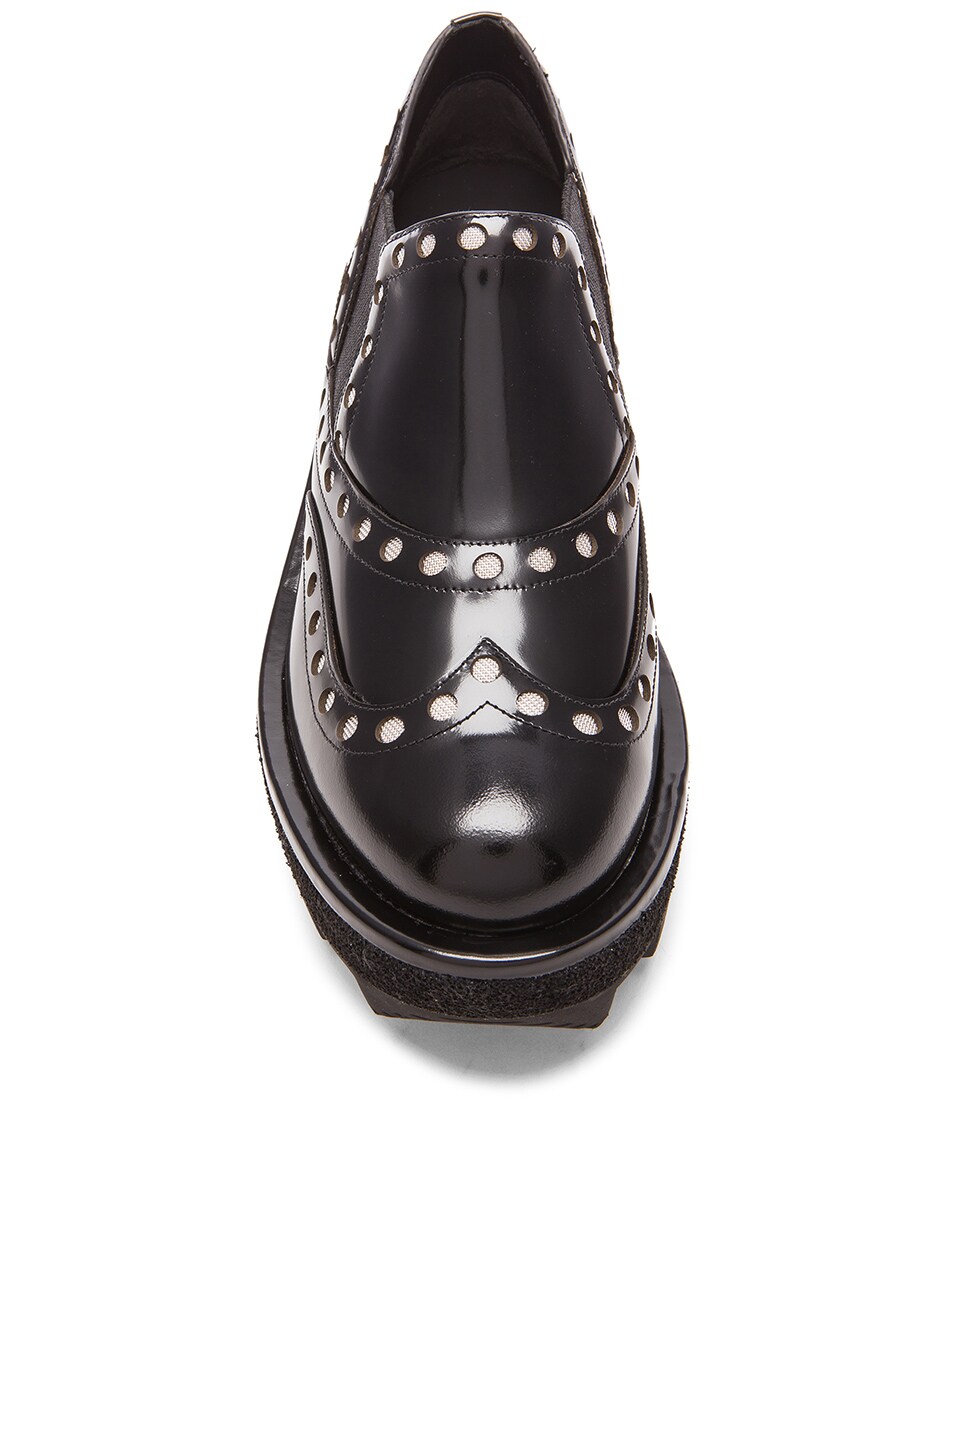 Alexander Wang Steph Spazzolato Low Leather Oxfords in Black | FWRD